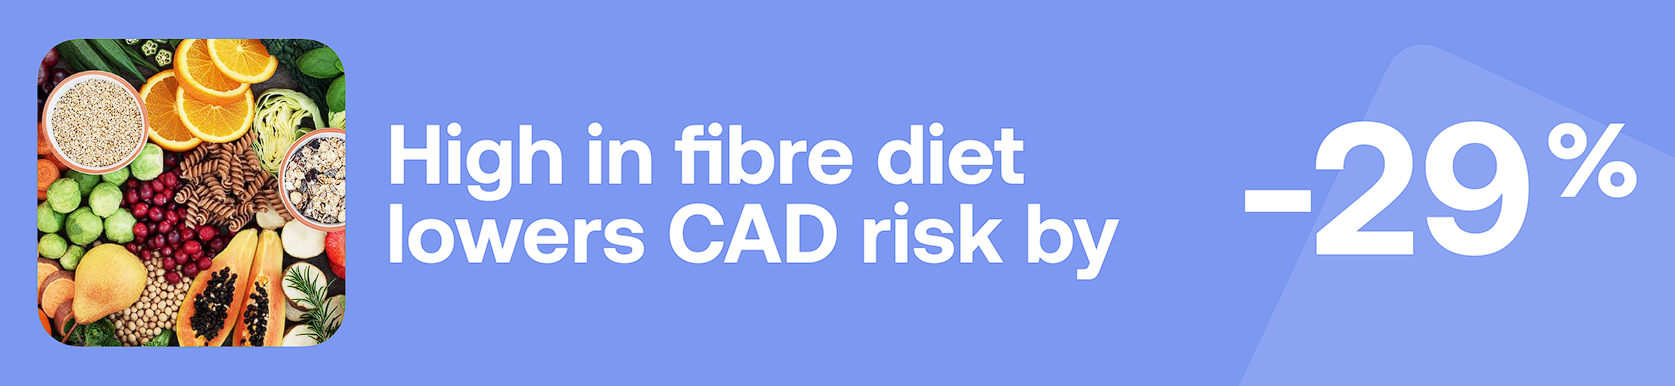 High in fibre diet lowers CAD risk by -29%